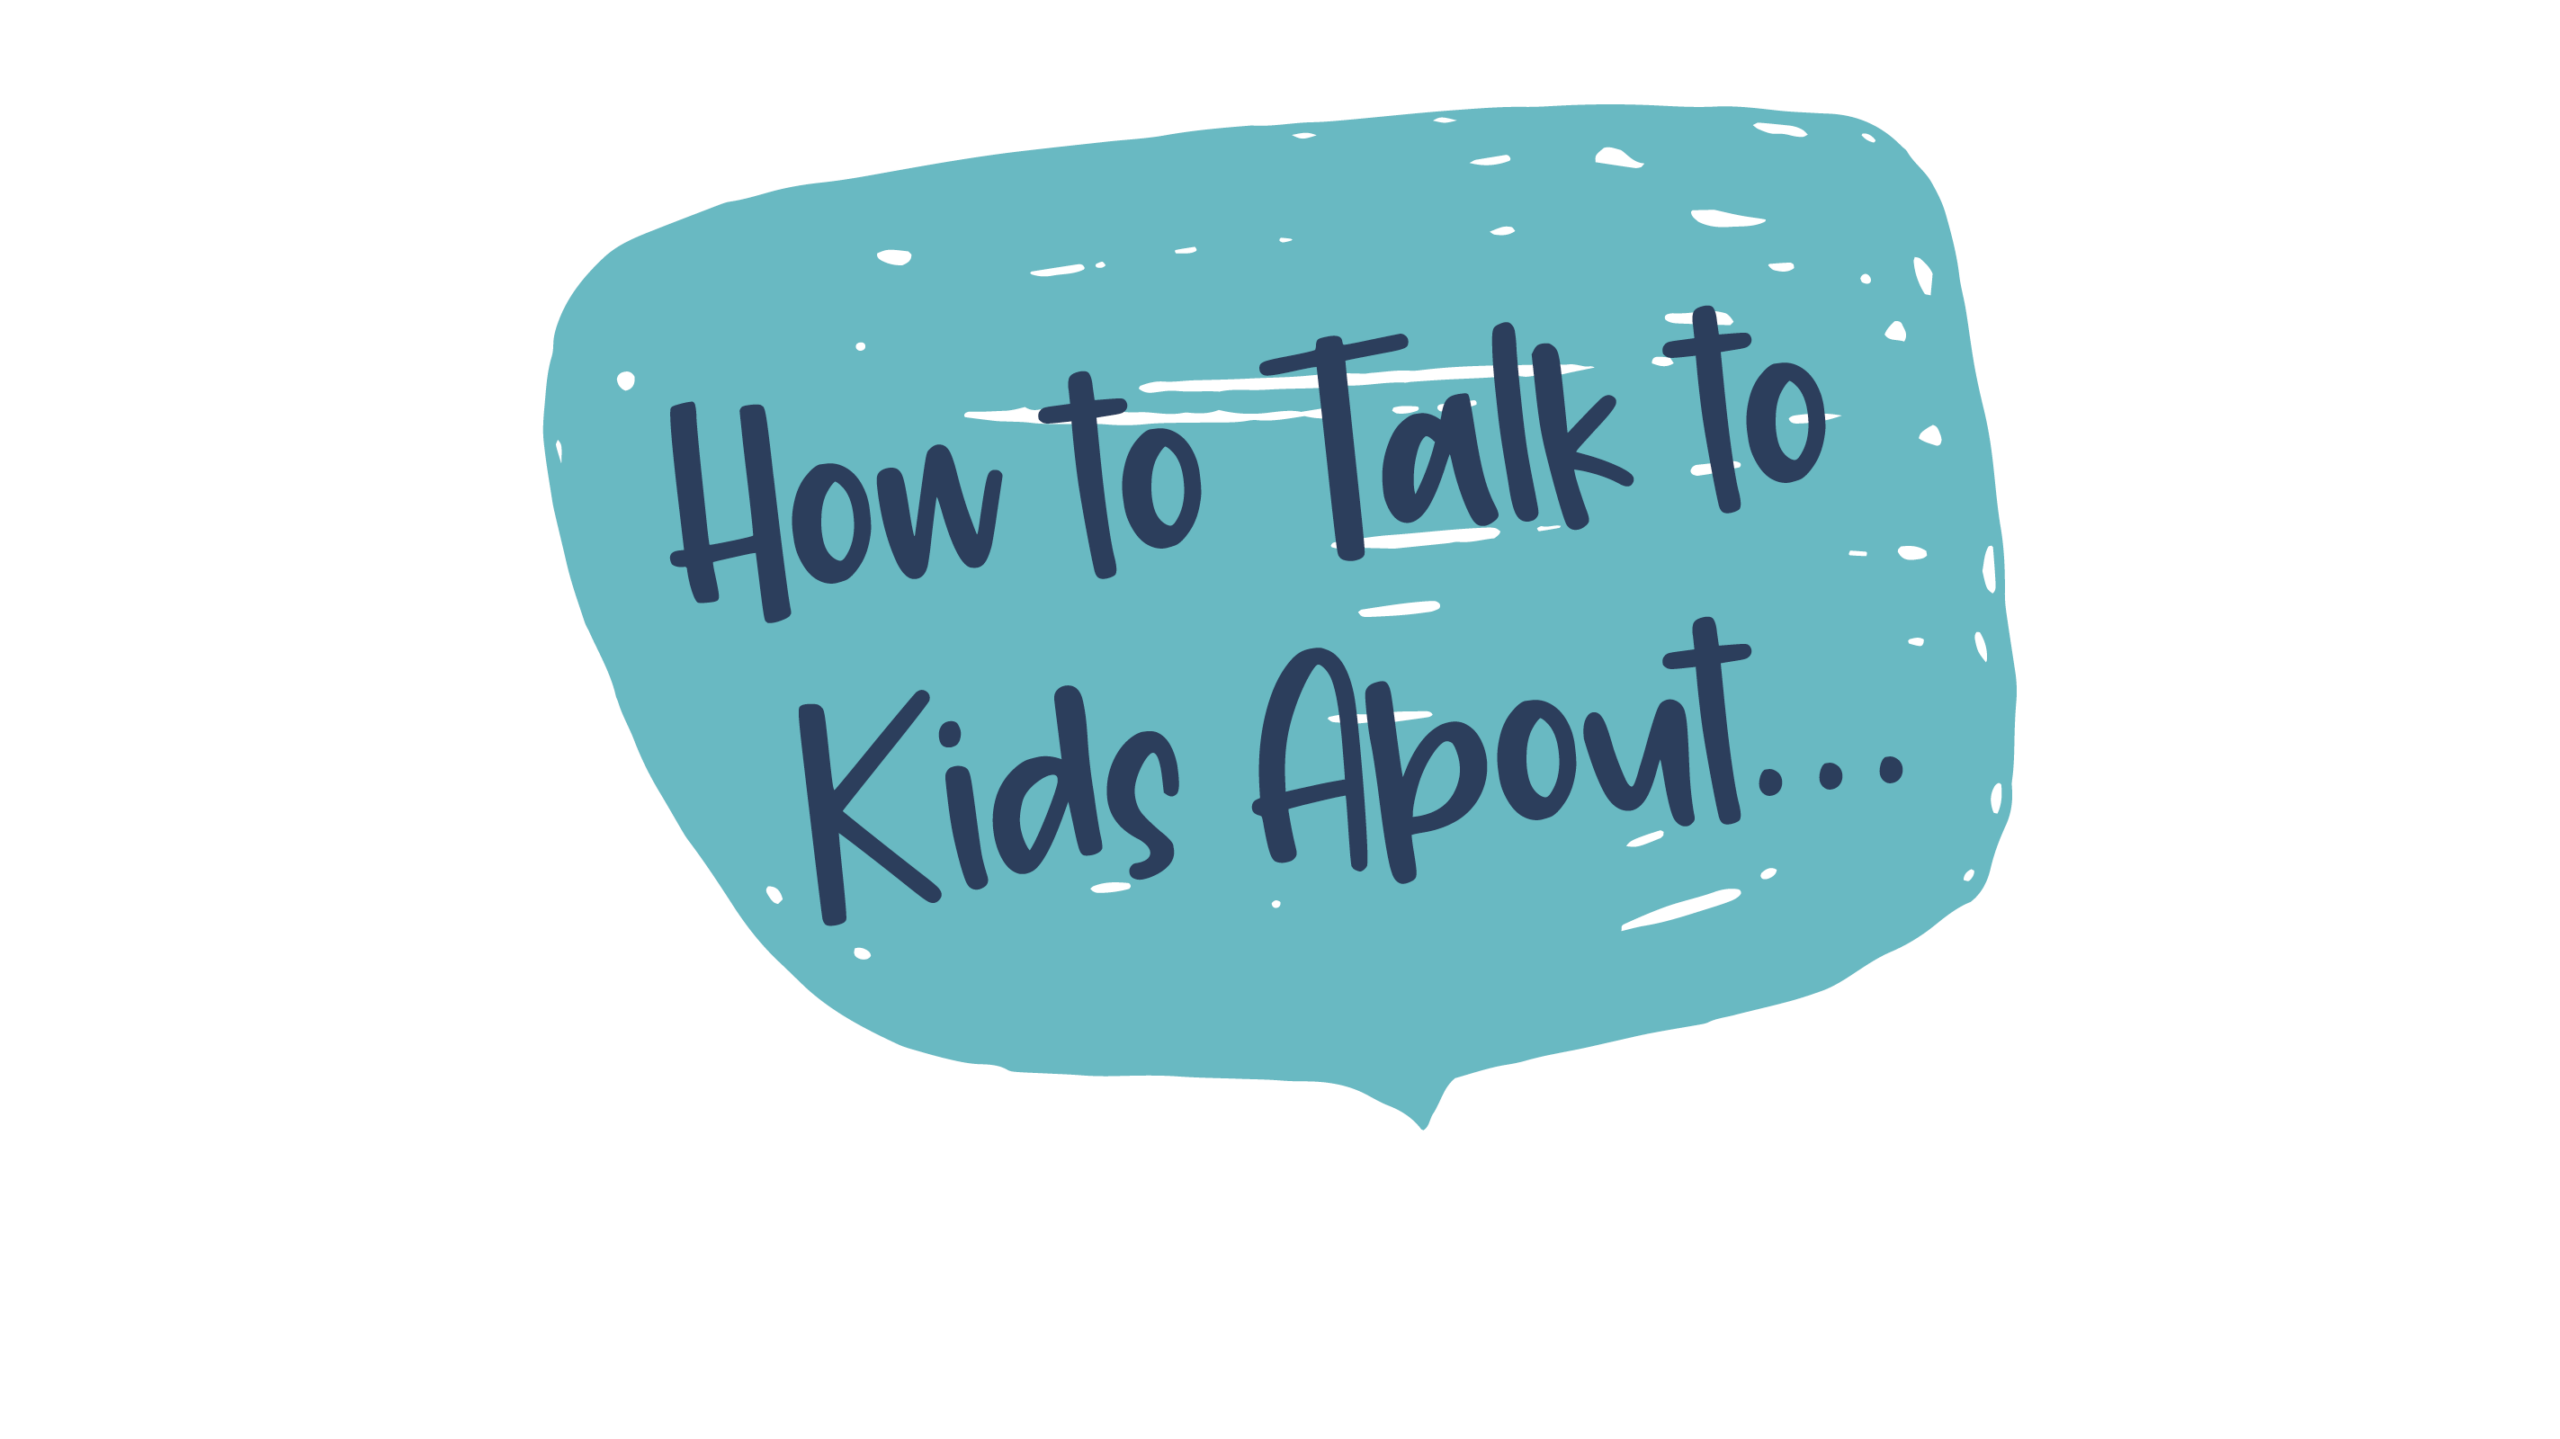 How To: Talk To Kids About… The Minimum Wage